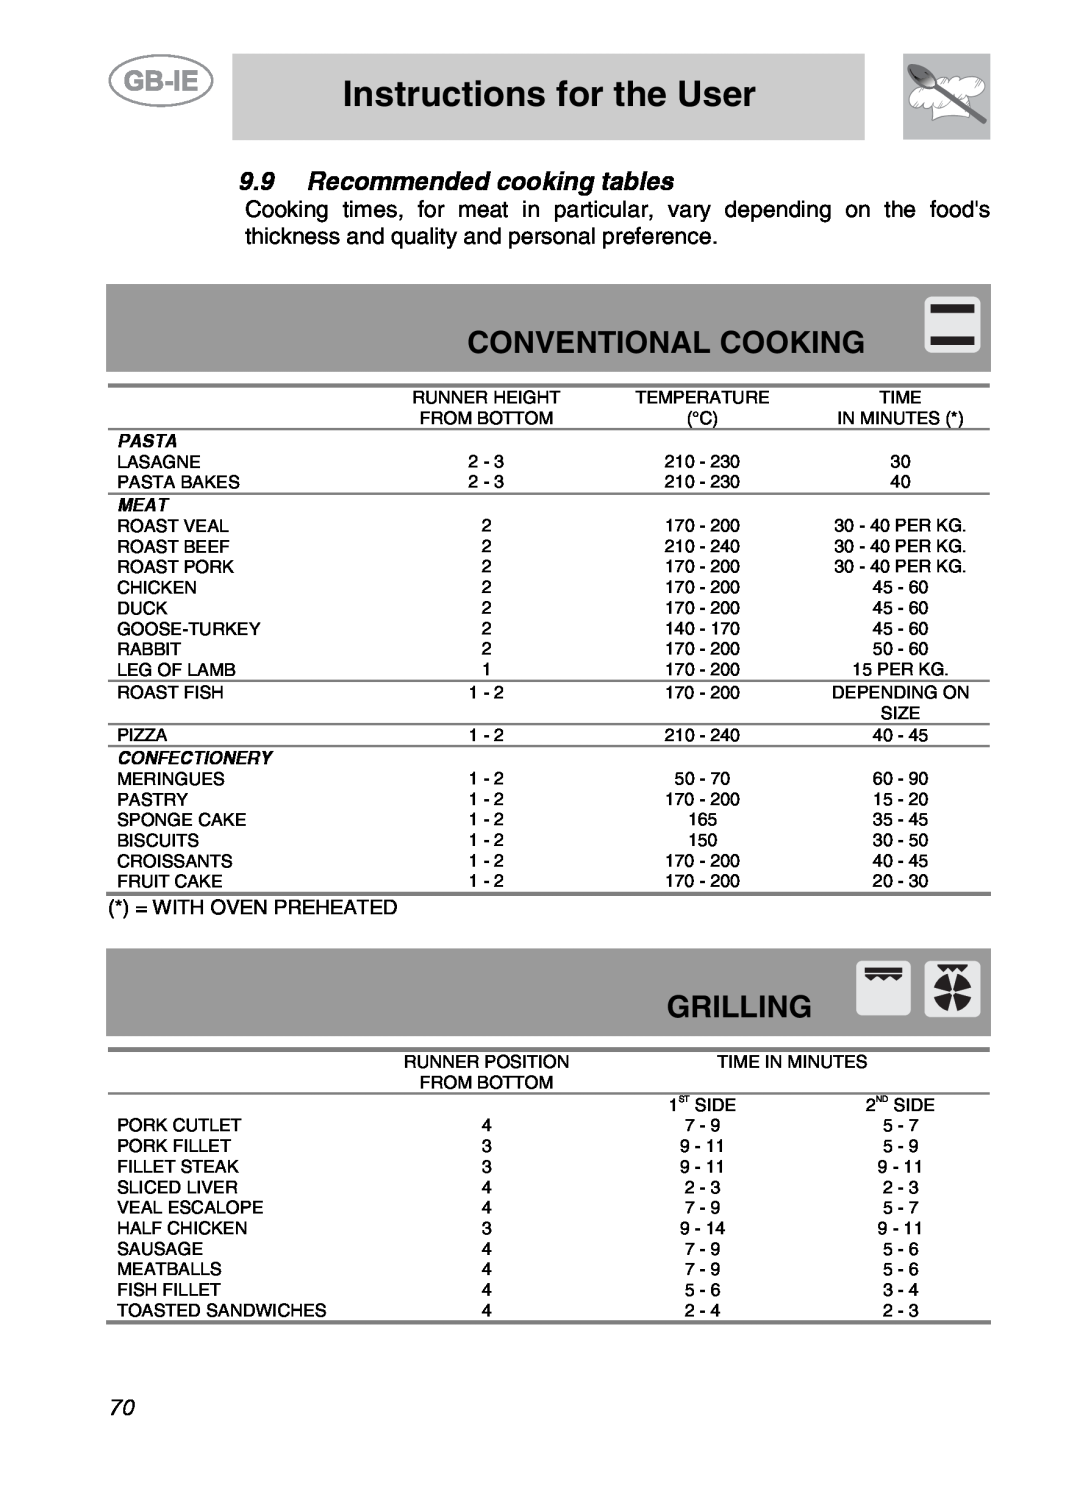 Smeg A2PY-6 manual Conventional Cooking, Grilling, Recommended cooking tables, Instructions for the User, Pasta, Meat 